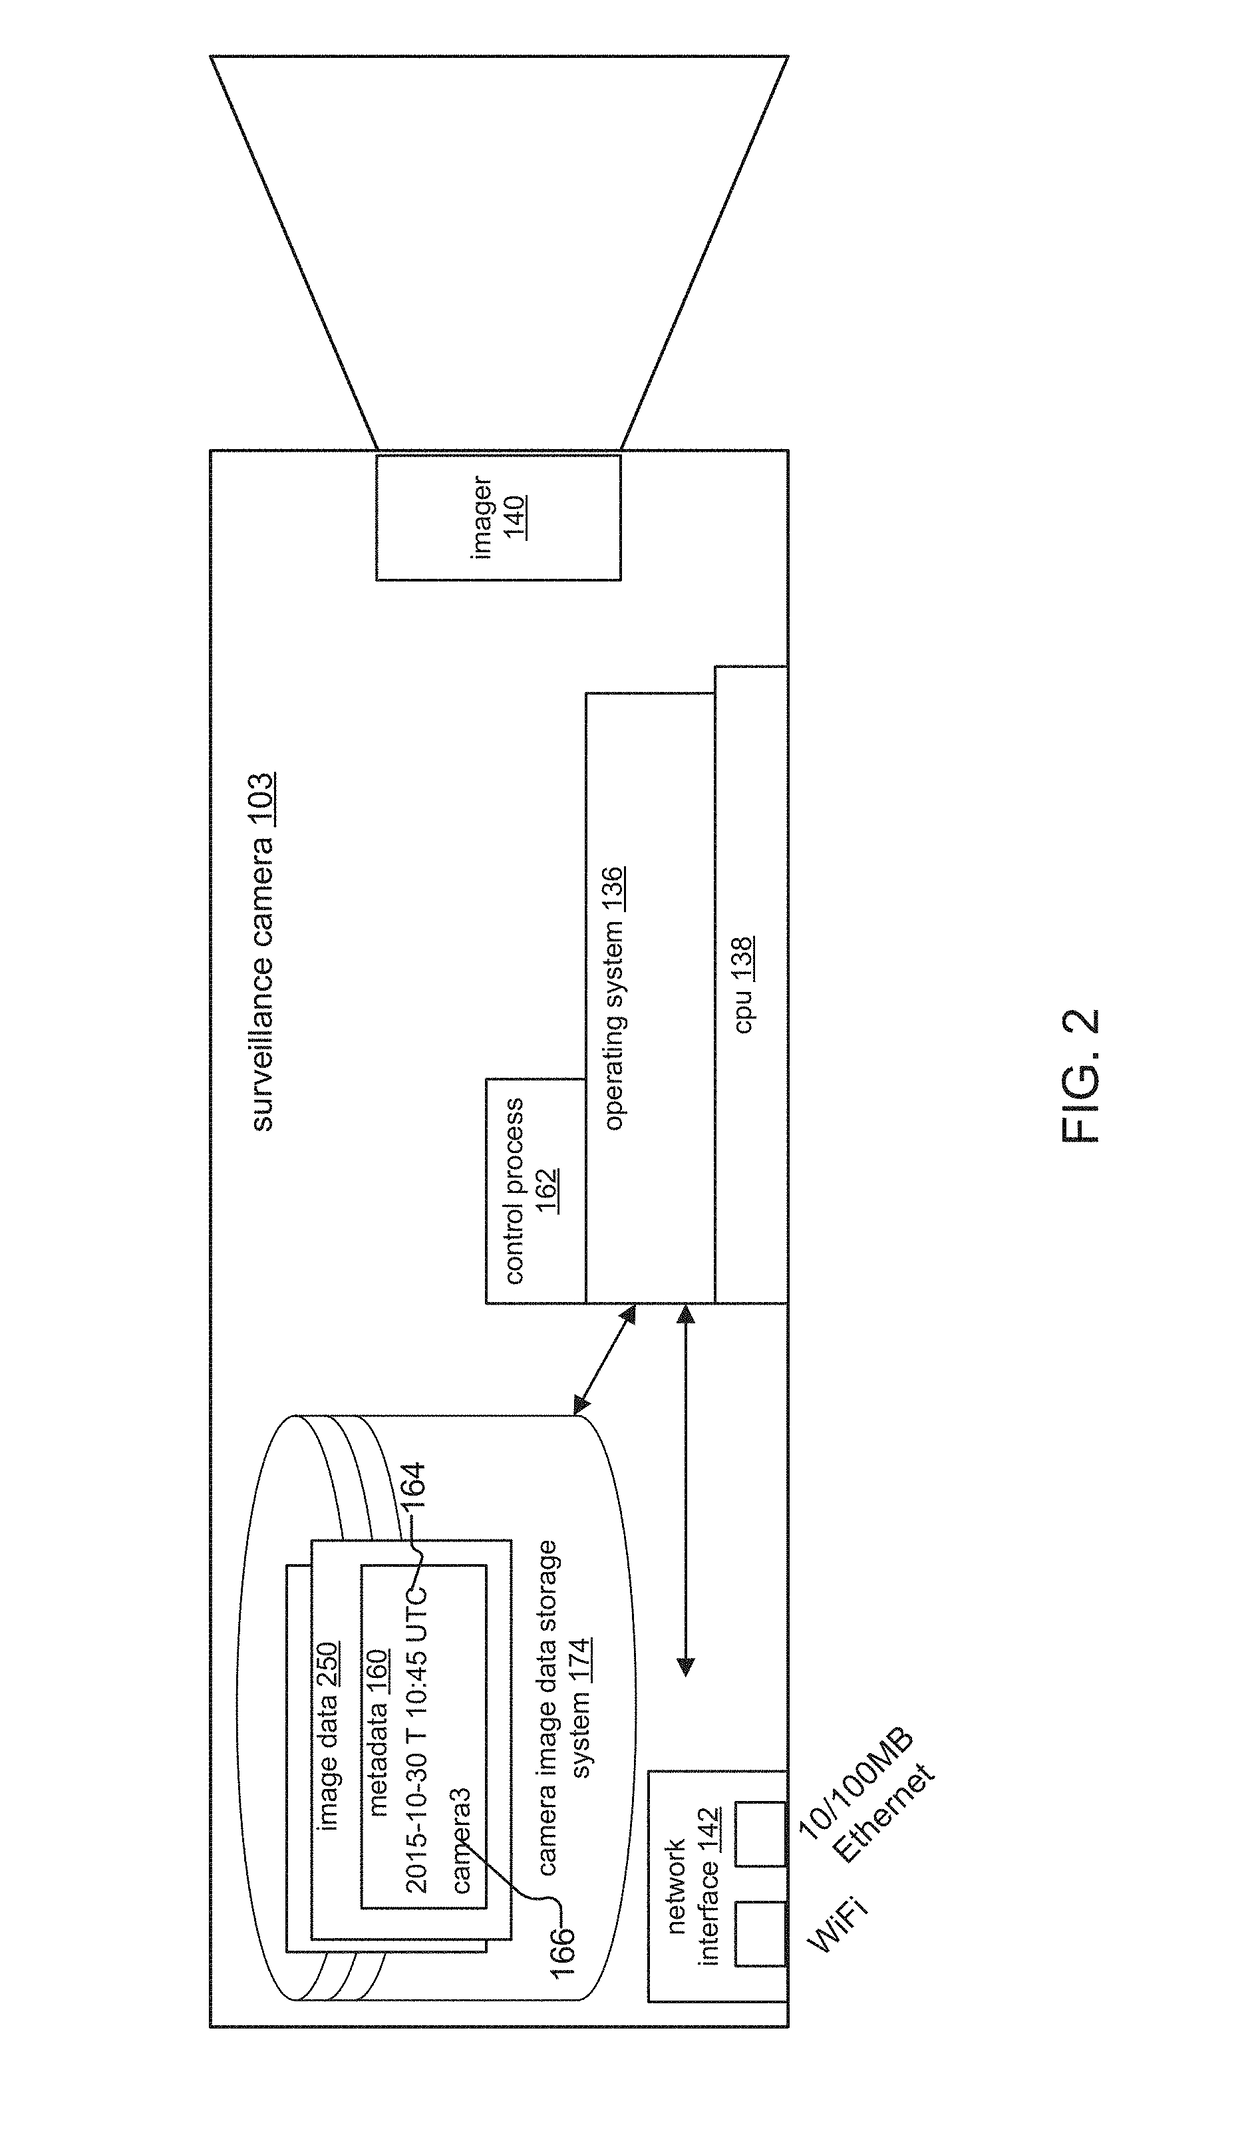 System and method for using mobile device of zone and correlated motion detection